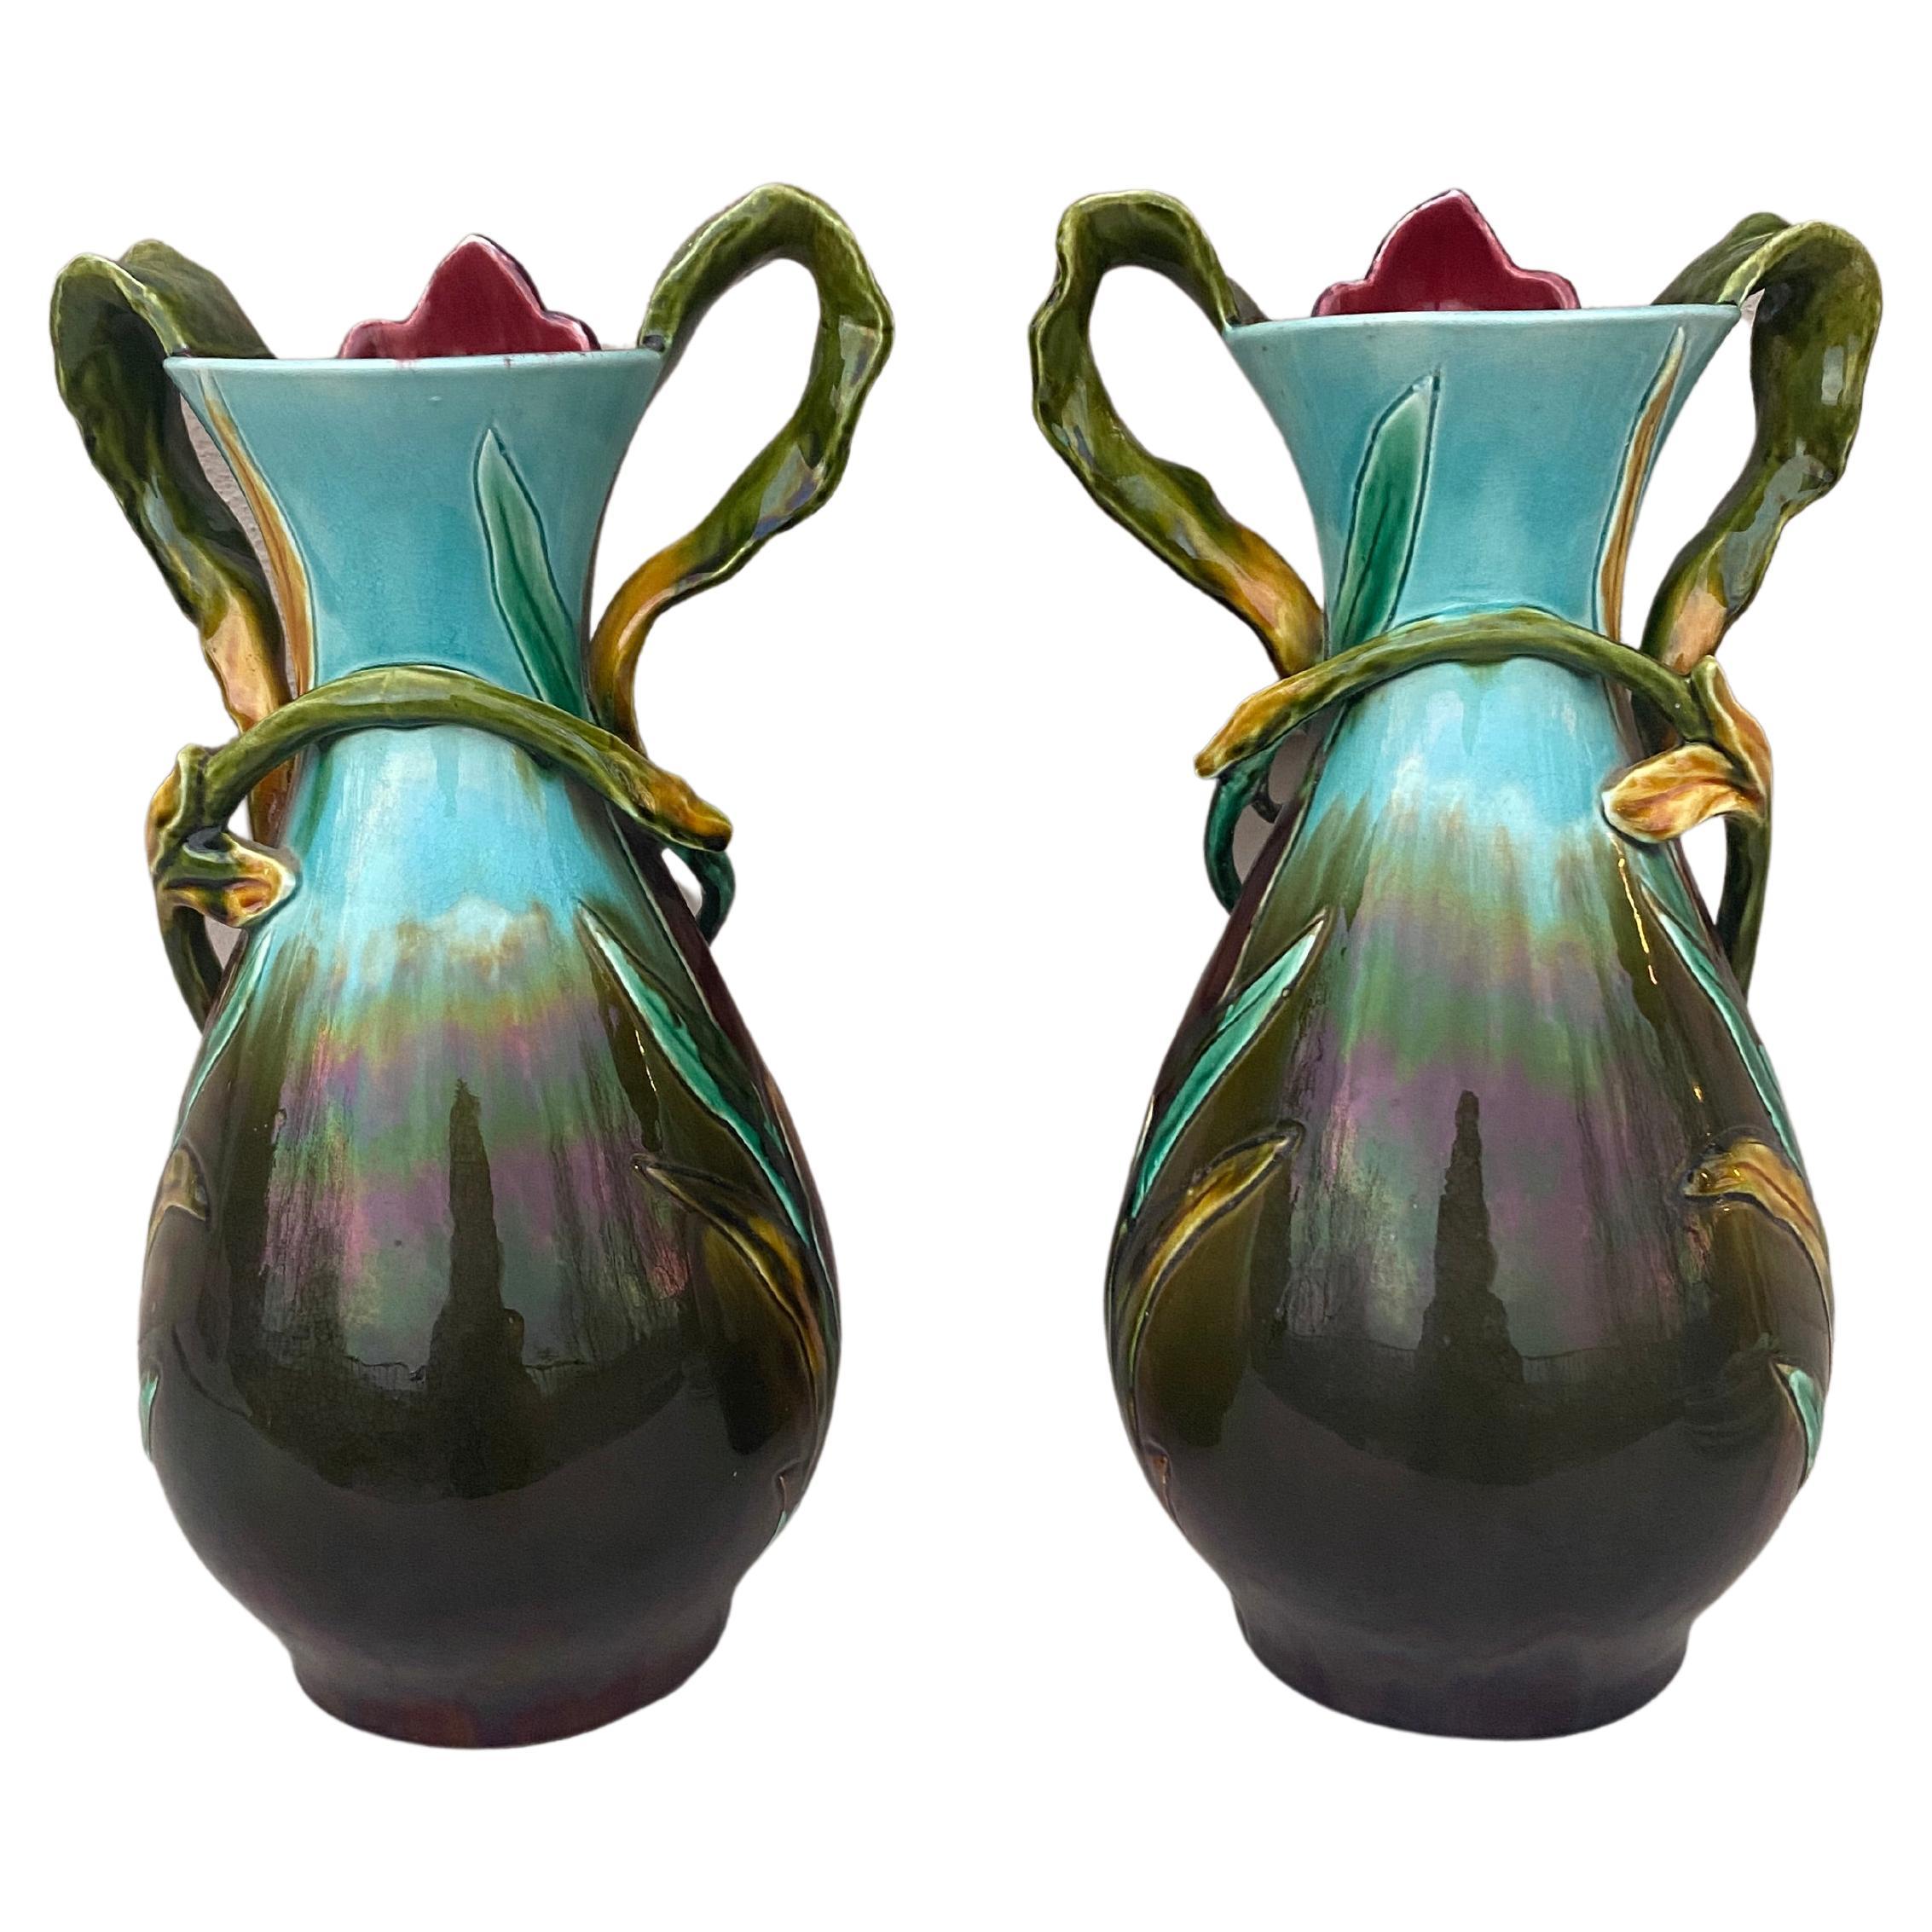 Large French Majolica pair of Iris Vases Orchies, circa 1890.
Measures: height / 13.5 inches.